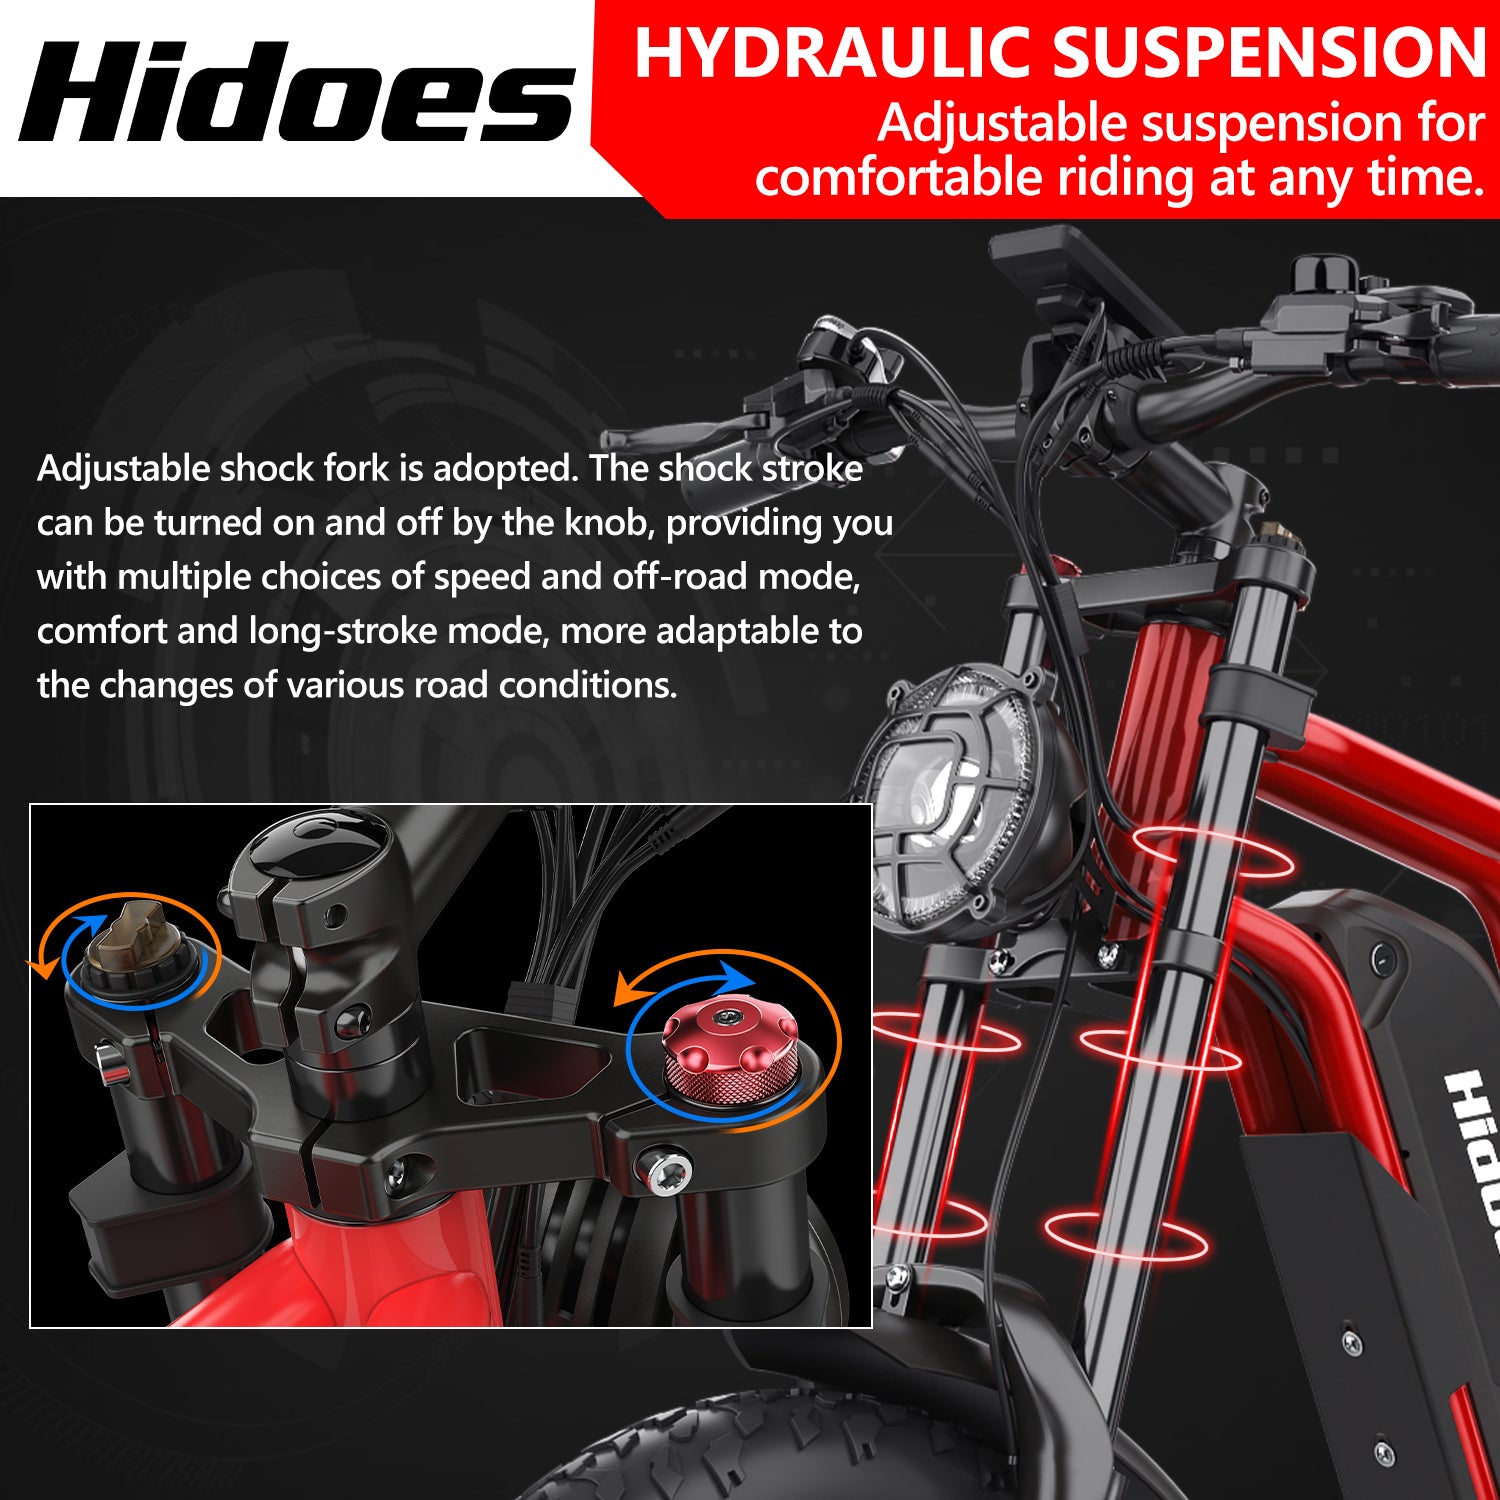 Hidoes B6 fat tire electric bike with adjustable hydraulic suspension